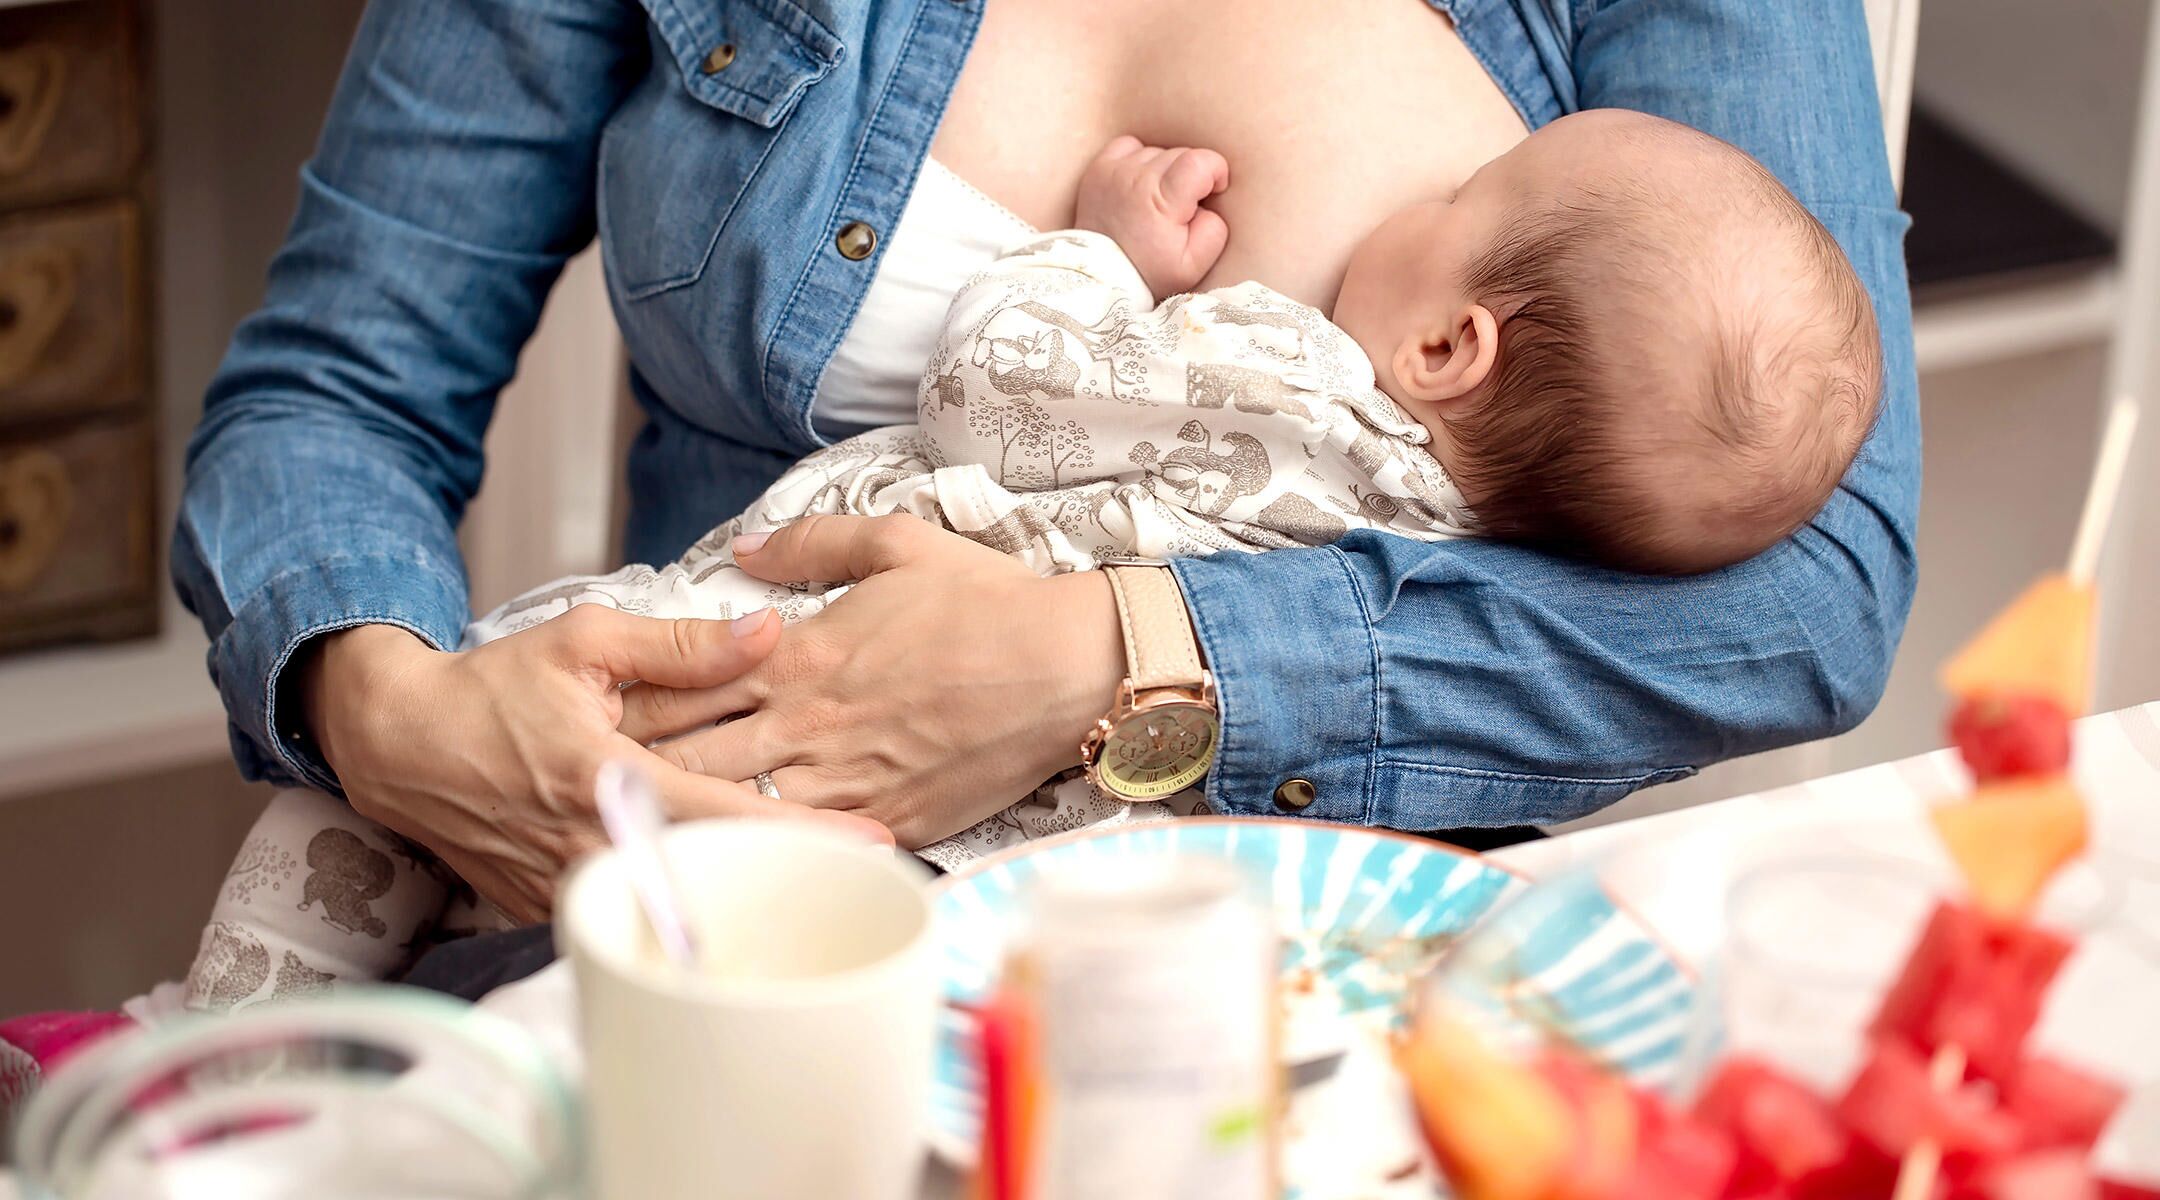 is-drinking-alcohol-while-breastfeeding-safe